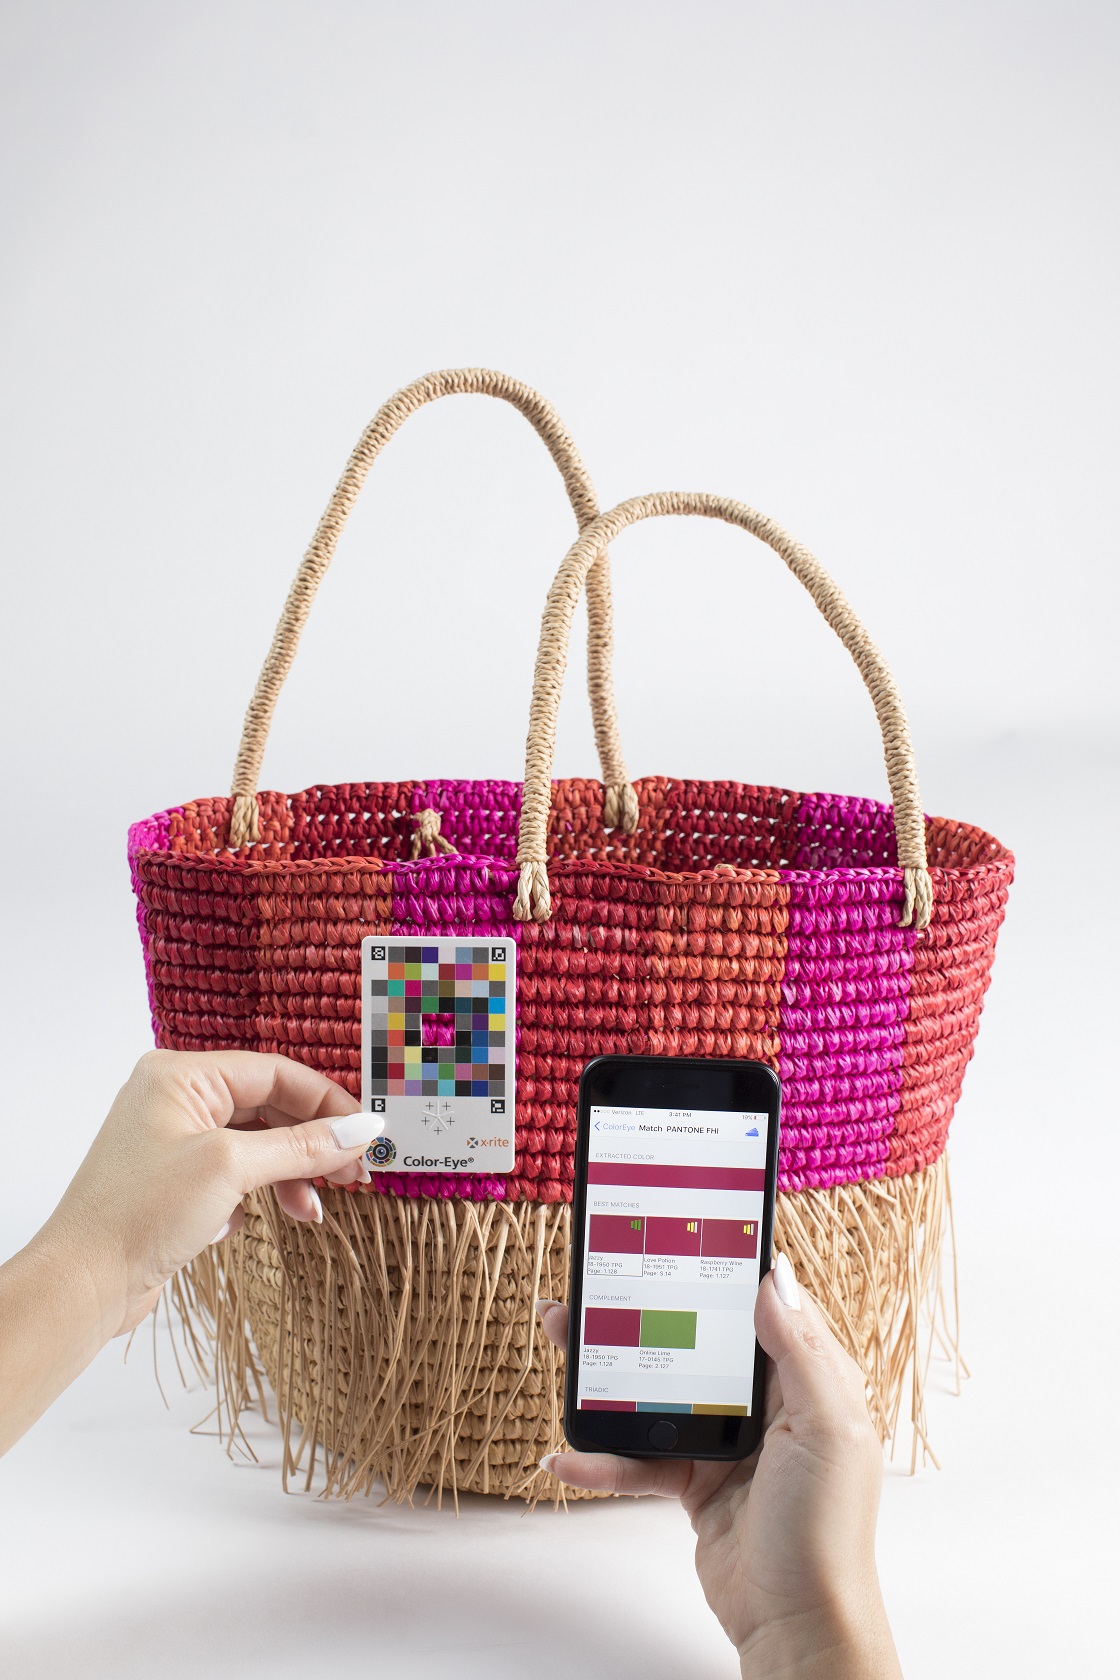 Integrate Color-Eye into mobile shopping applications and consumers can search, match and purchase goods with a high degree of color confidence.